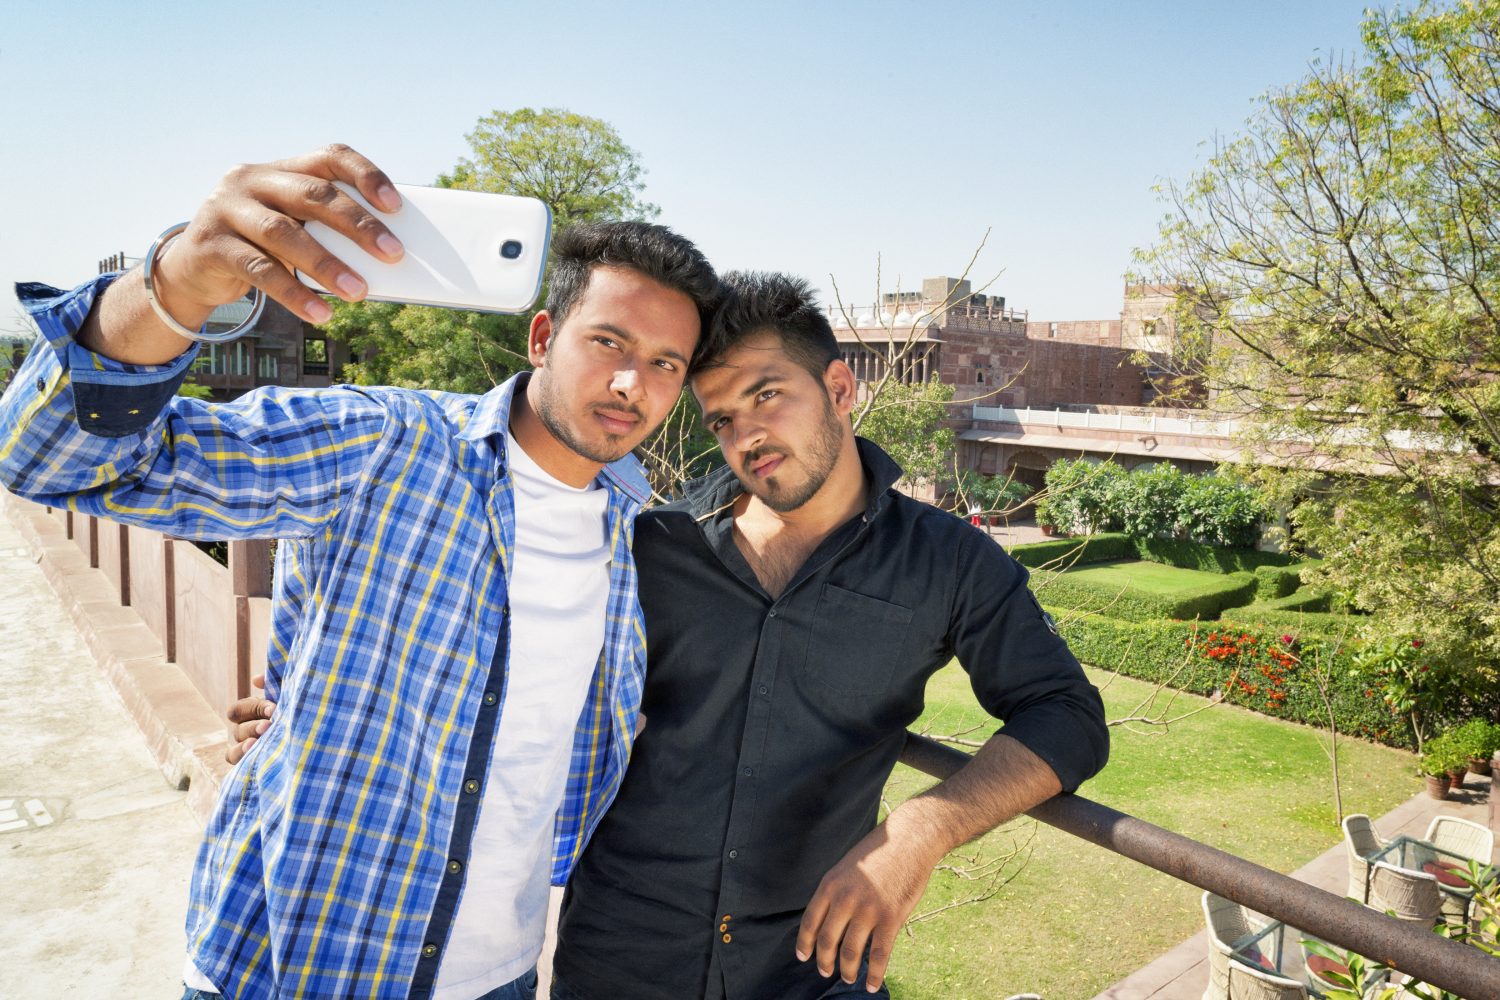 Two young Indian men taking a selfie together.